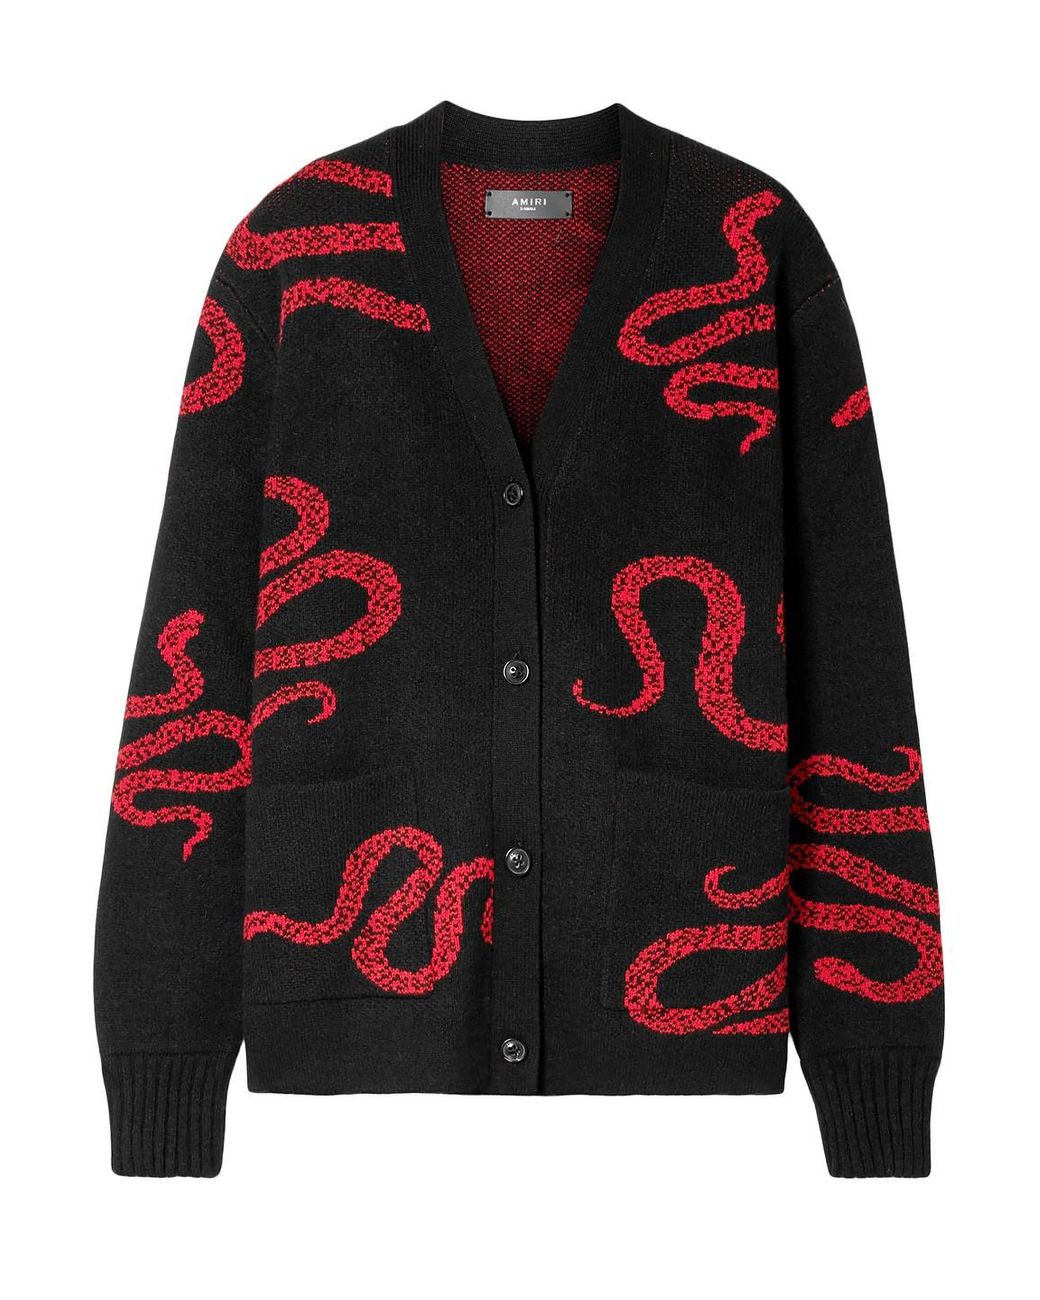 Amiri Snake Cashmere And Wool Cardigan in Black/Red (Black) - Save 62% ...